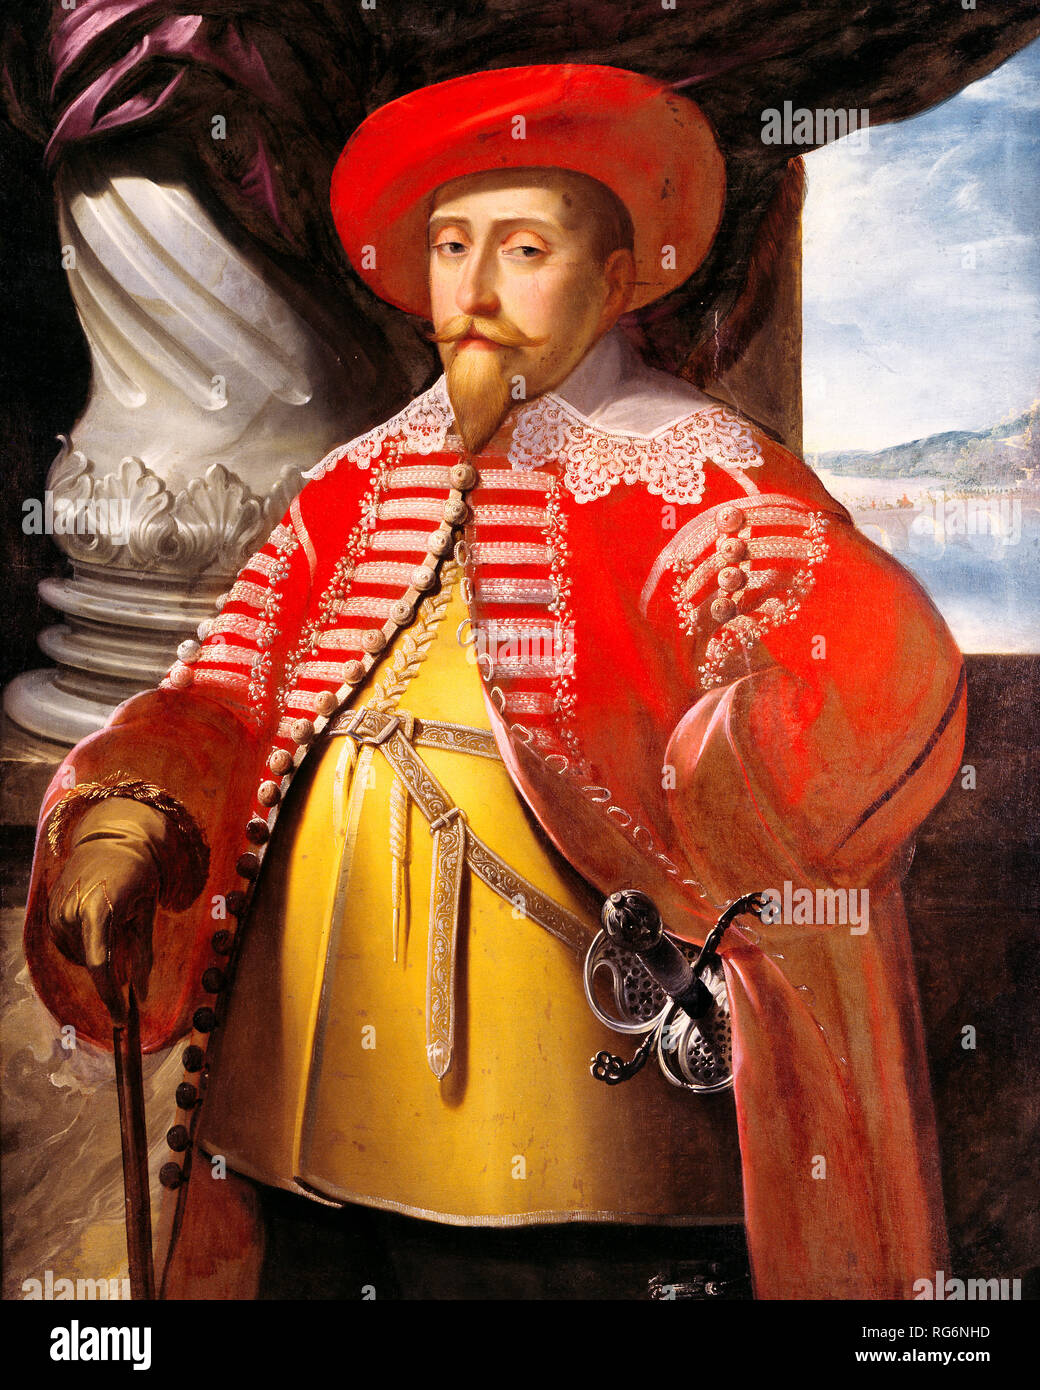 The portrait depicts King Gustavus Adolphus in what traditionally has been described as a Polish costume with a red jacket decorated with braid, velvet cuffs, a lace collar and a red hat, with a view of Frankfurt-am-Main in the background. 1632 Stock Photo